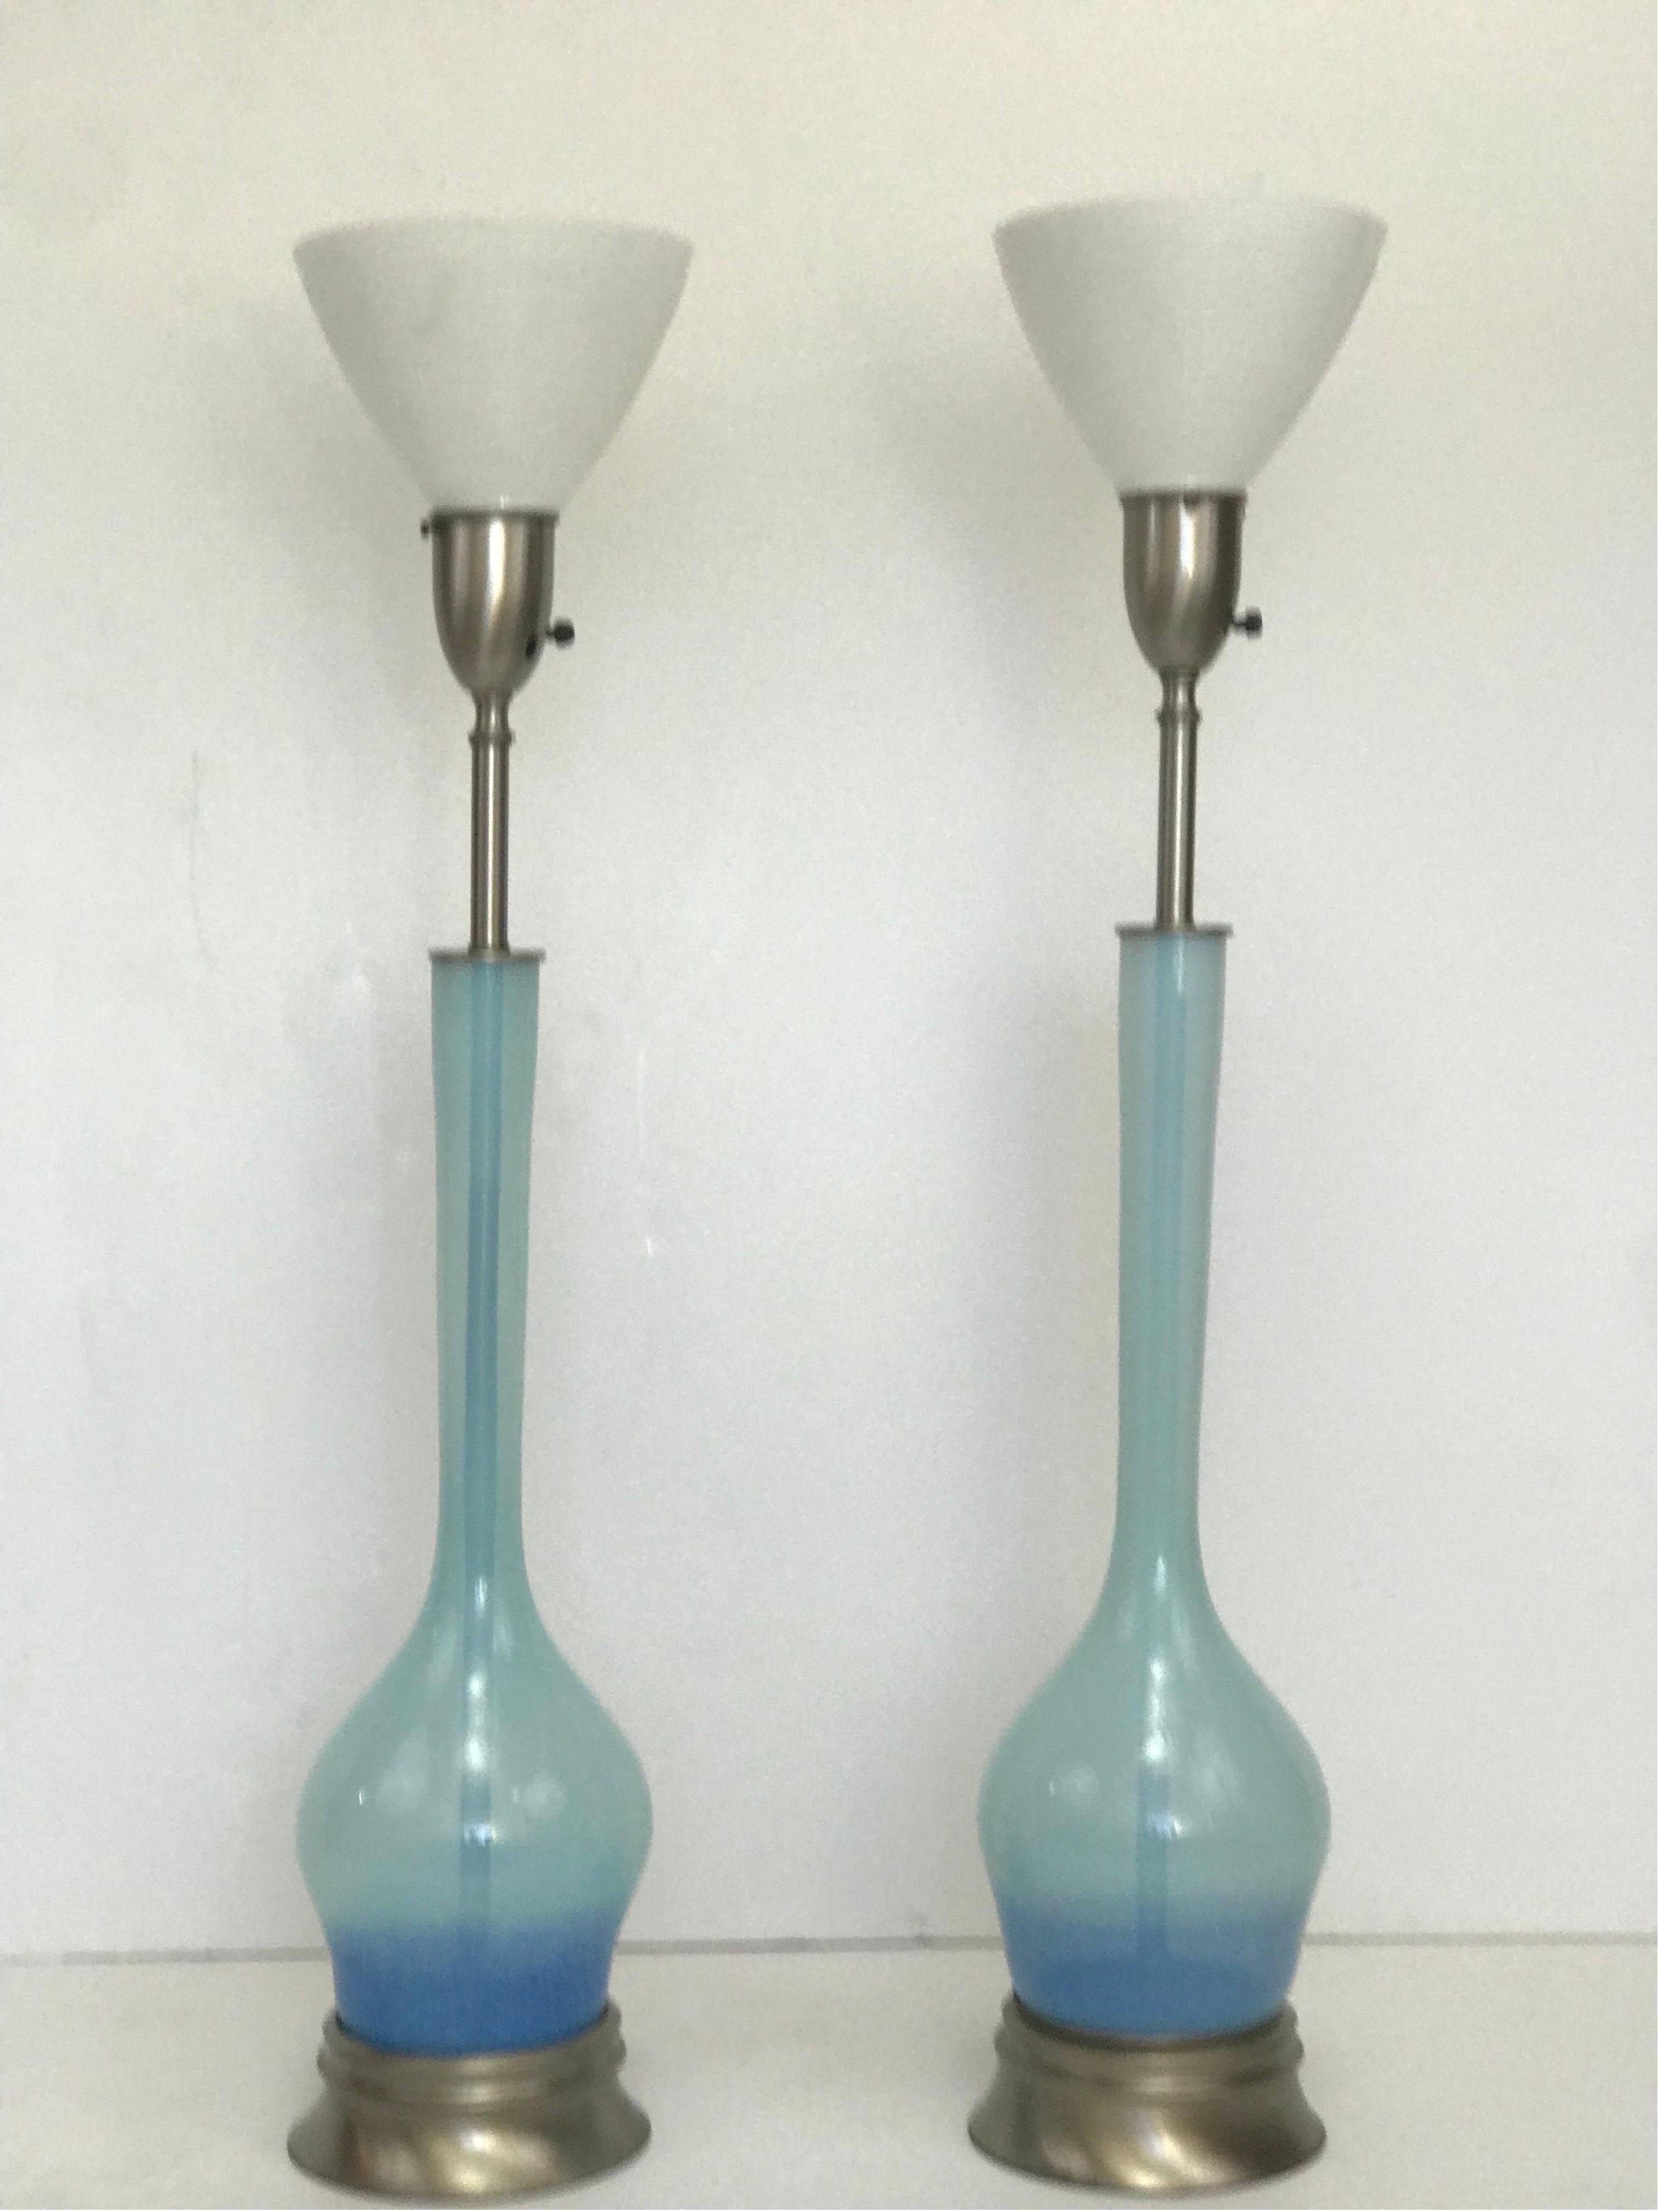 A tall pair of early 1950’s transitional modern table lamps in hand blown blue glass that is slightly graded from top to bottom. Both are slightly different than each other yet a matched pair and transition from an opaque silvery blue at the neck to